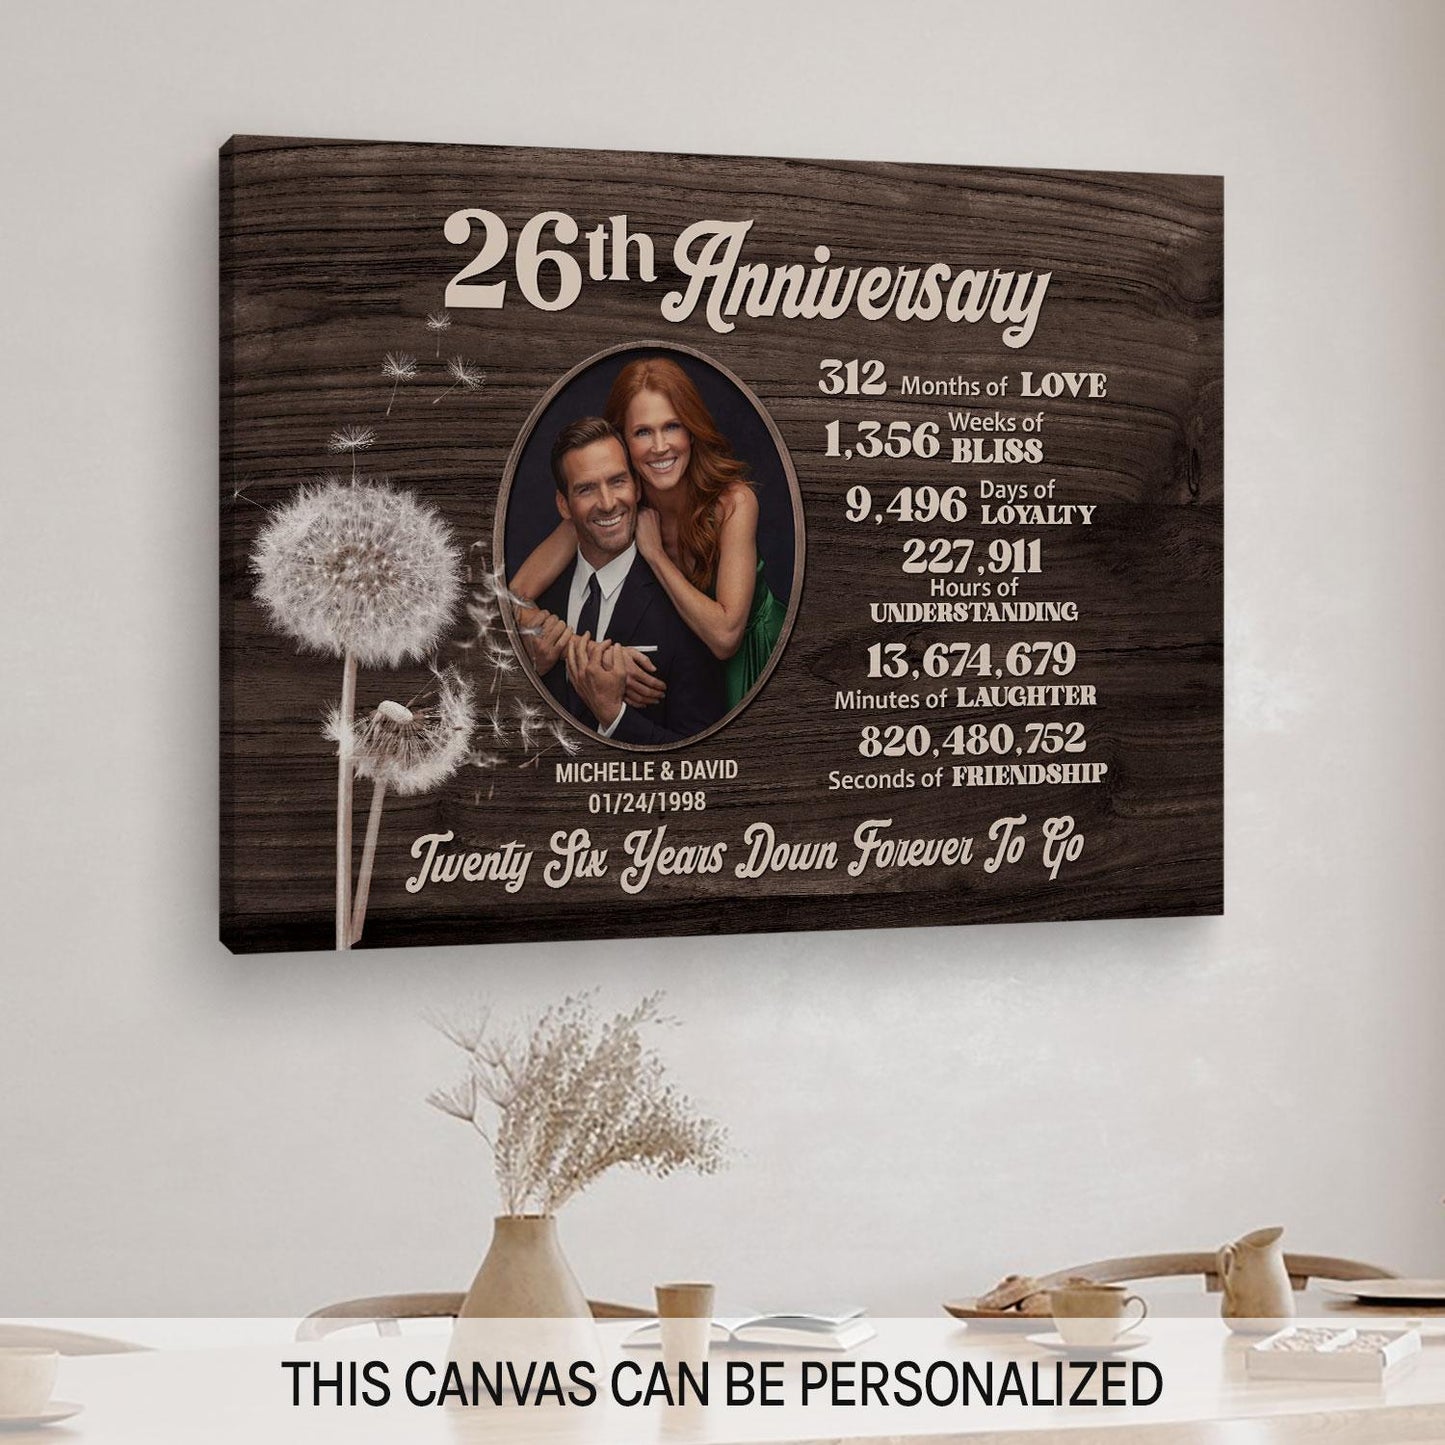 26th Anniversary - Personalized 26 Year Anniversary gift For Parents, Husband or Wife - Custom Canvas Print - MyMindfulGifts